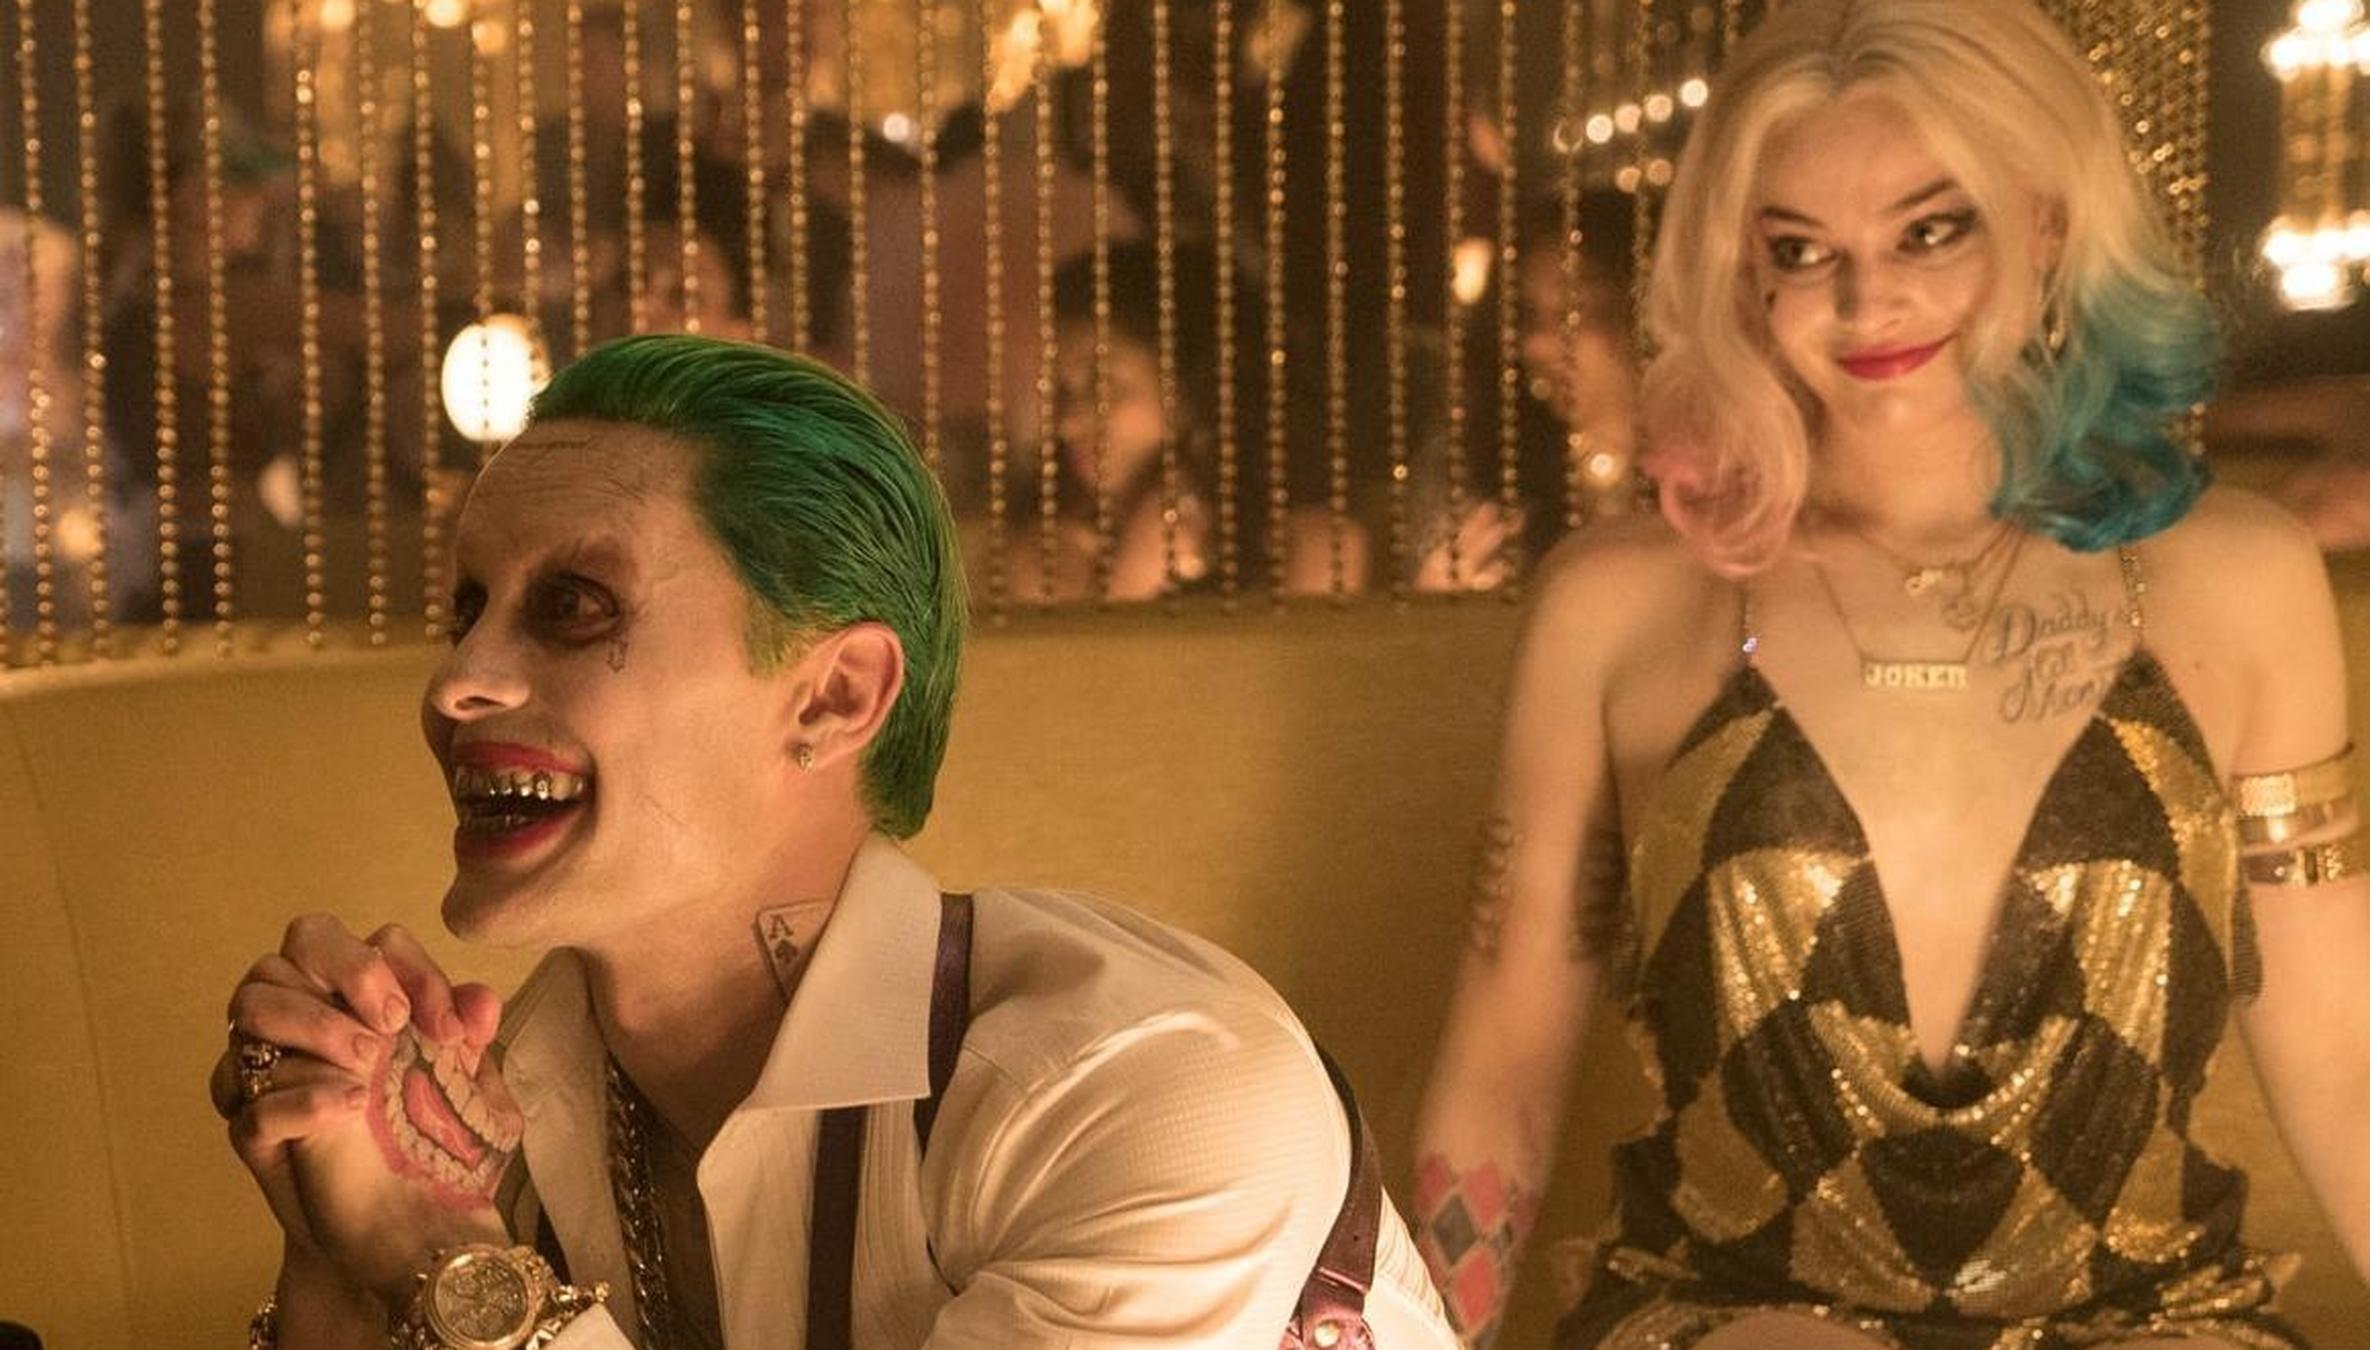 Harley Quinn: Margot Robbie to co-produce Suicide Squad spin-off film, The  Independent